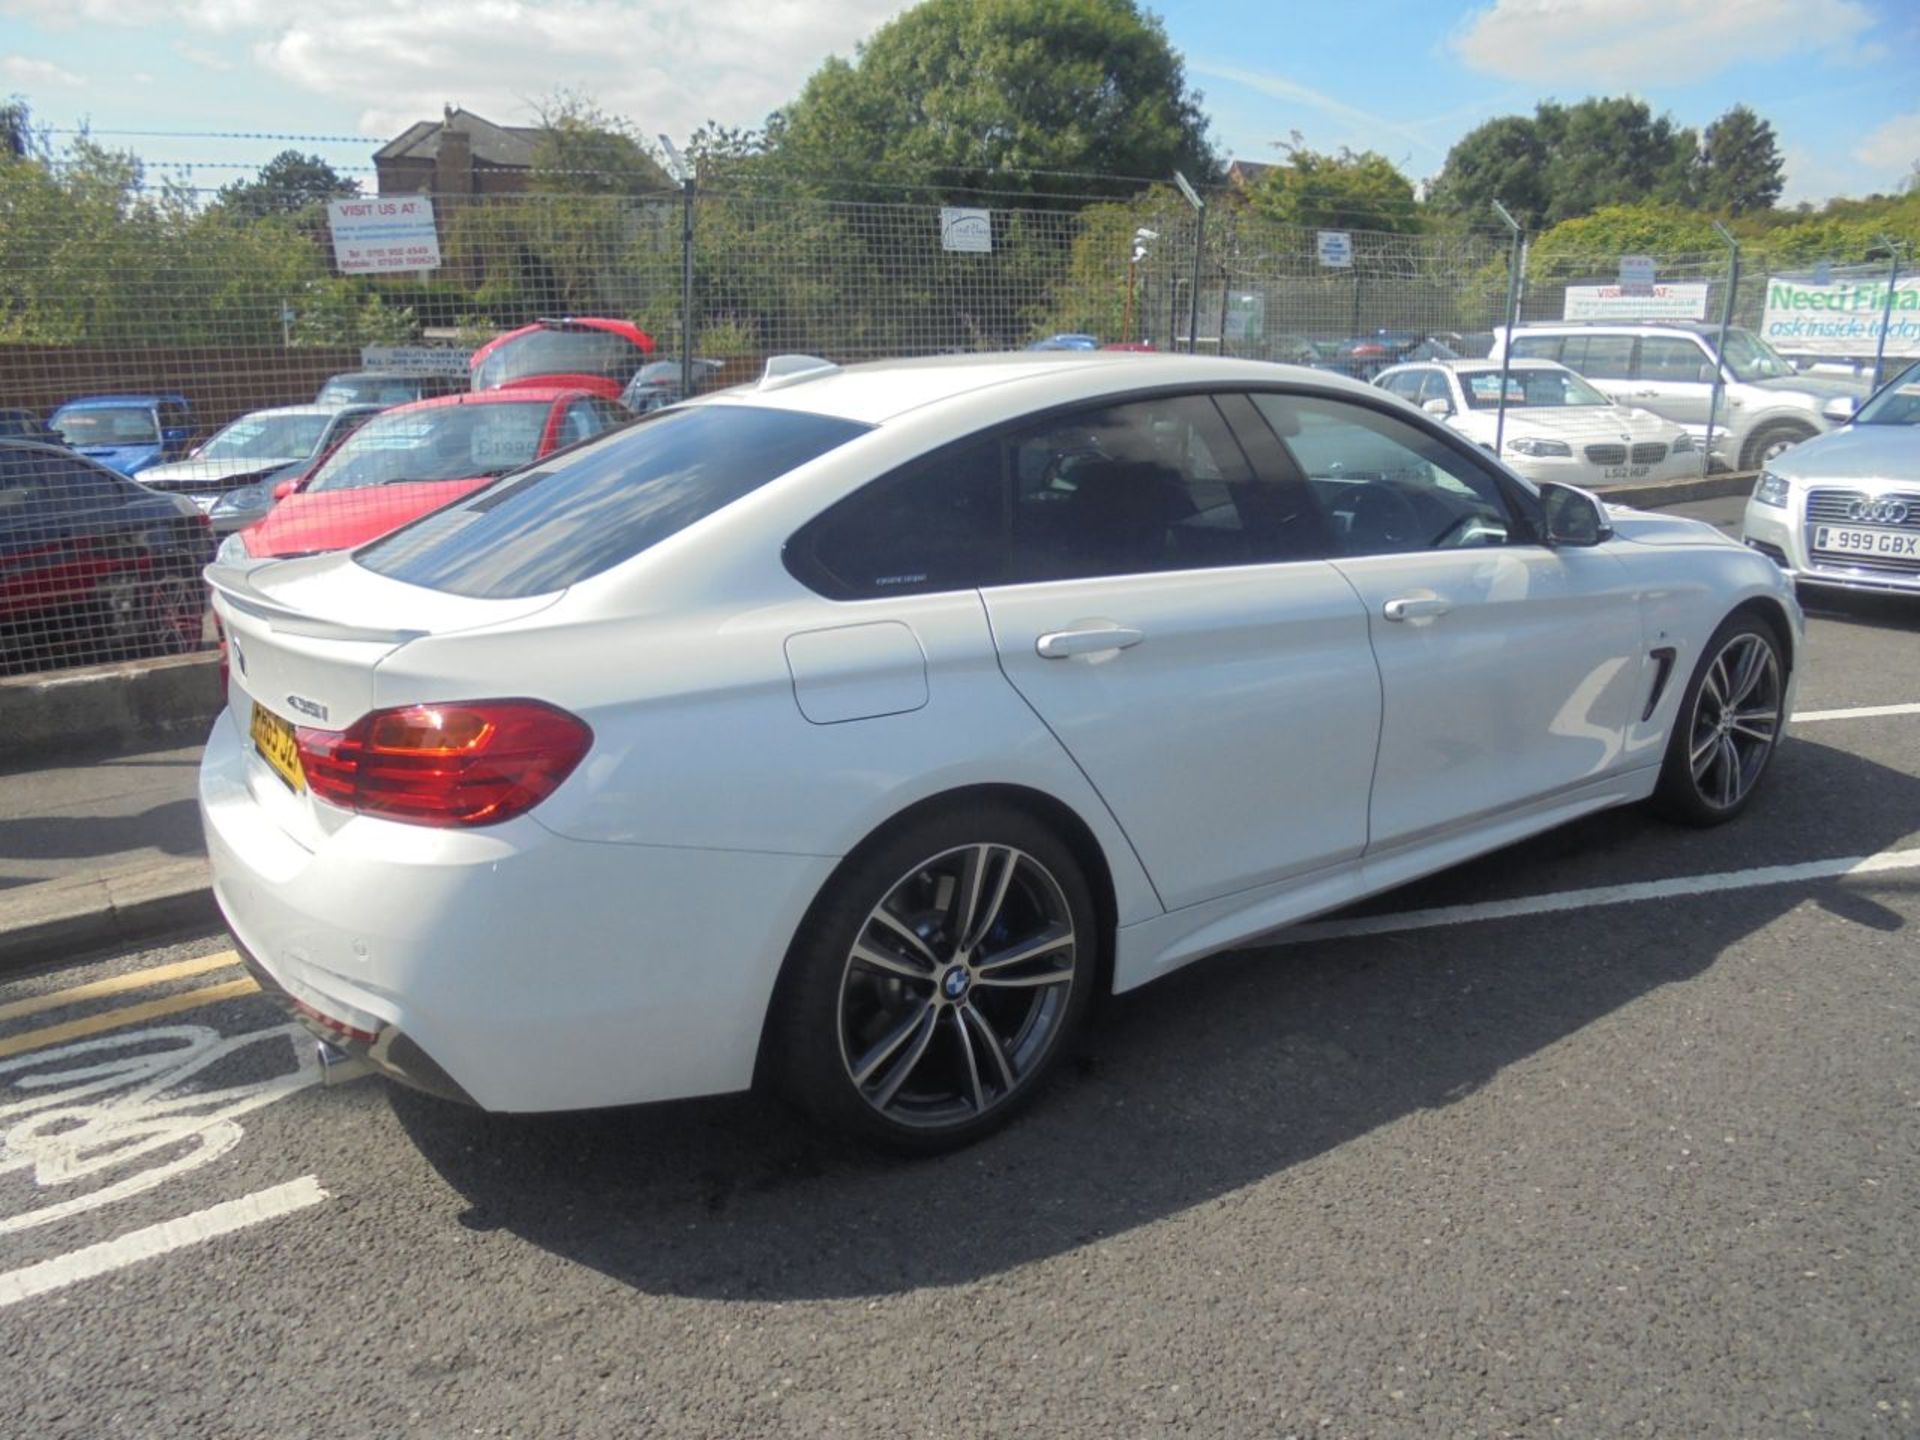 2015 (65 REG), BMW 4 SERIES GRAN COUPE 3.0 435I M SPORT GRAN COUPE AUTO 5DR COUPE, 1,200 MILES ONLY - Image 2 of 11